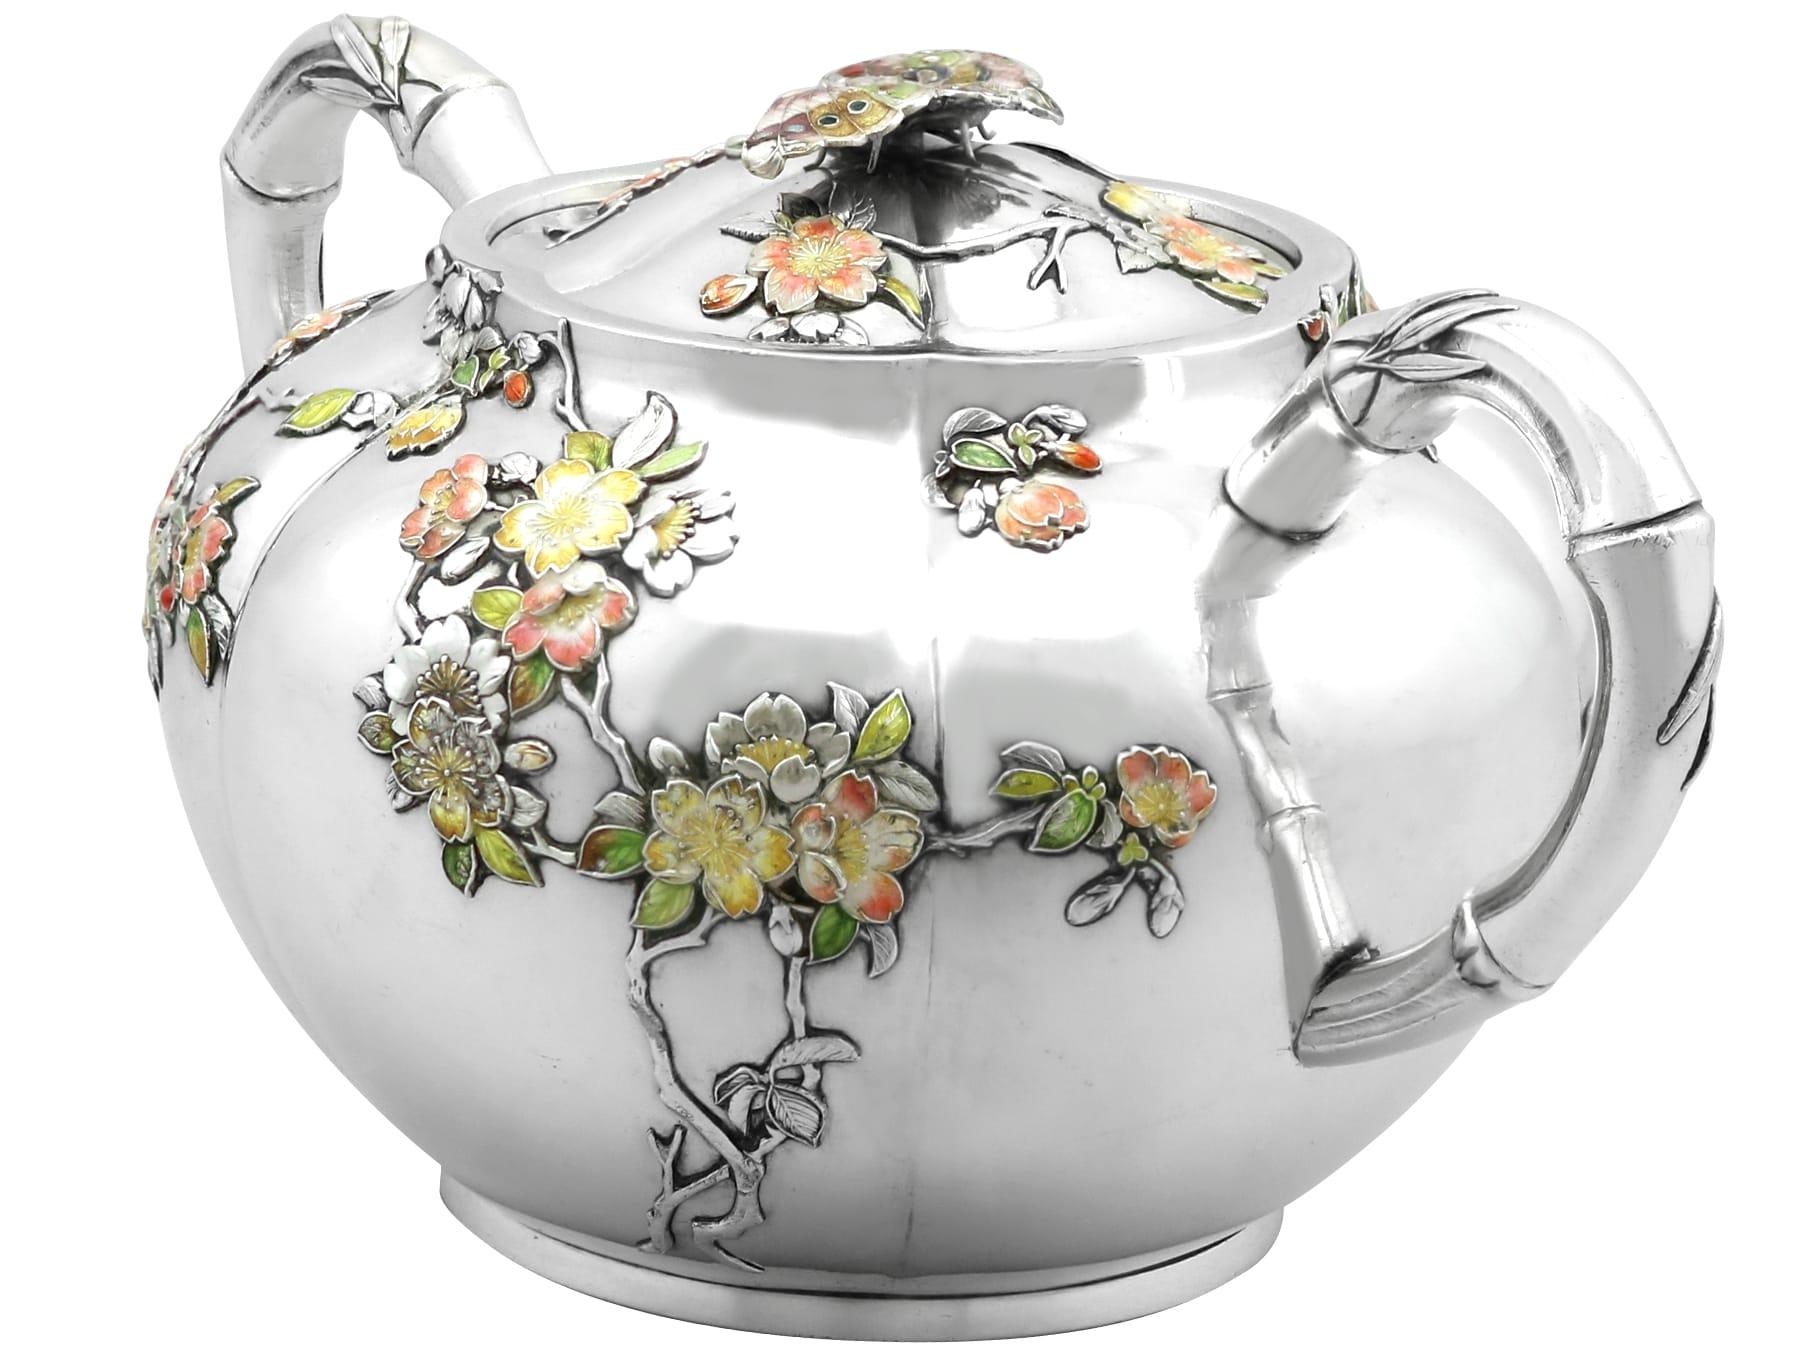 Antique Japanese Silver and Enamel Cream Jug and Sugar Bowl Circa 1890 For Sale 2